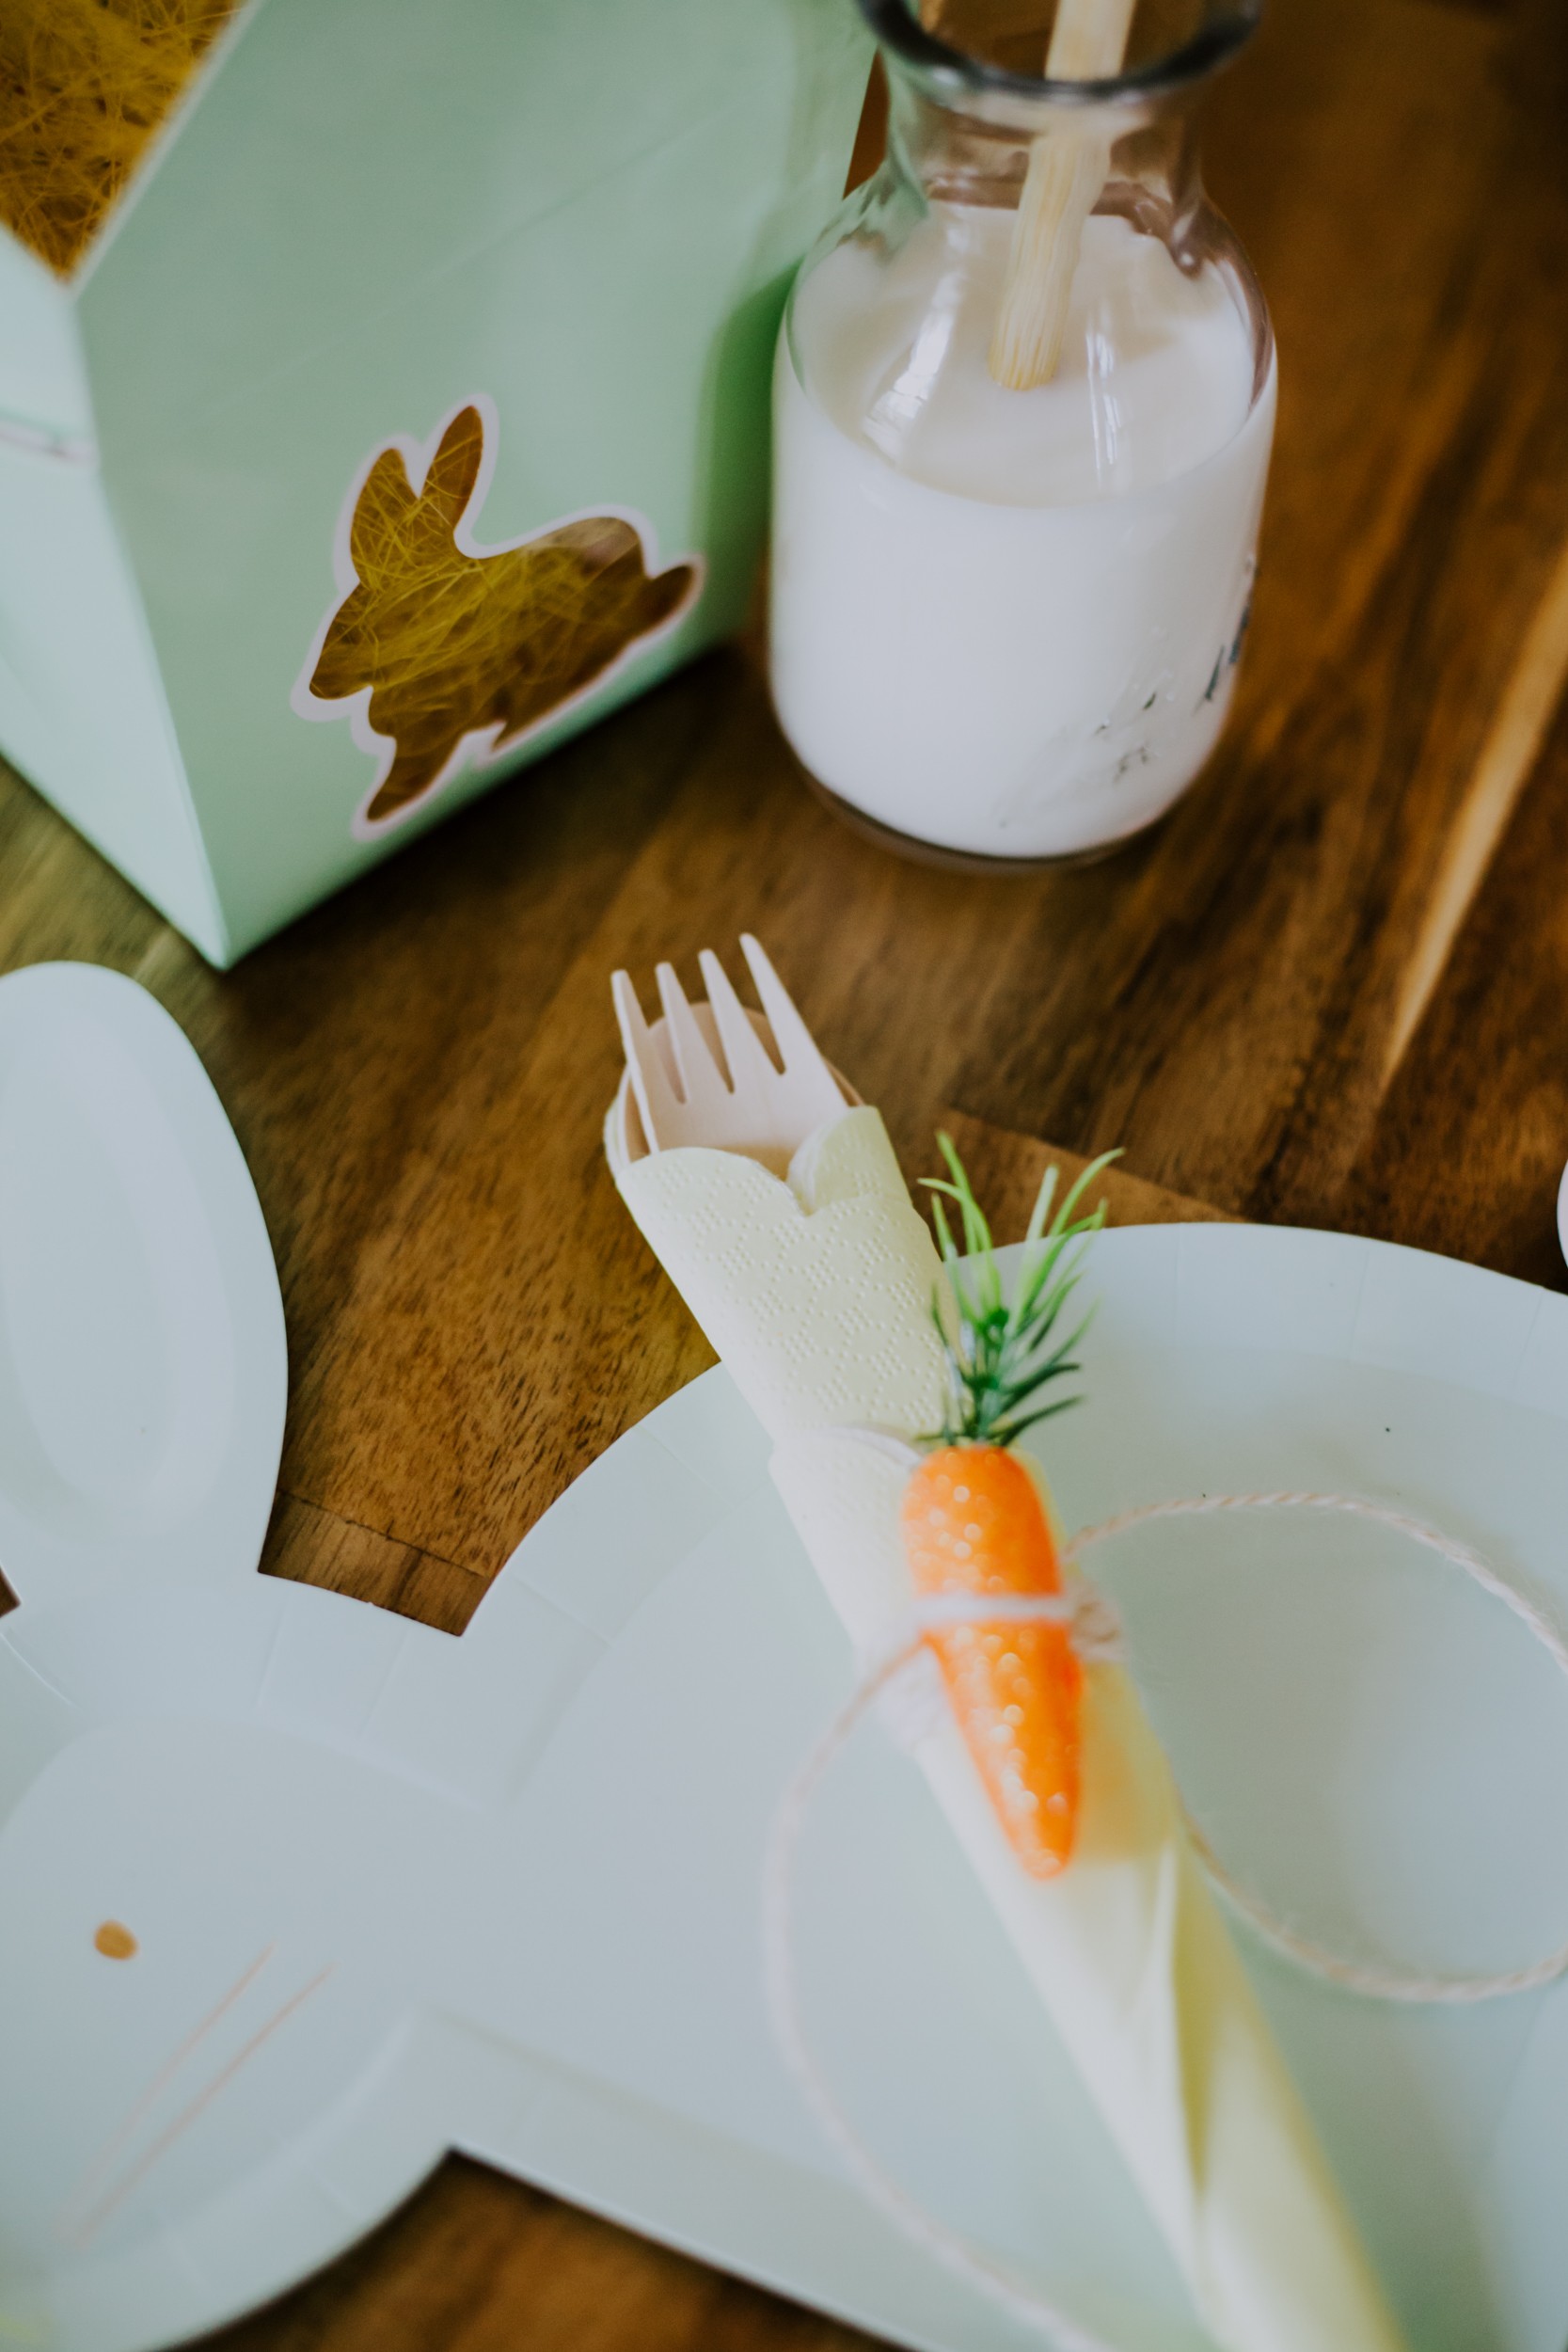 a cutlery rollup features a tiny carrot as decor